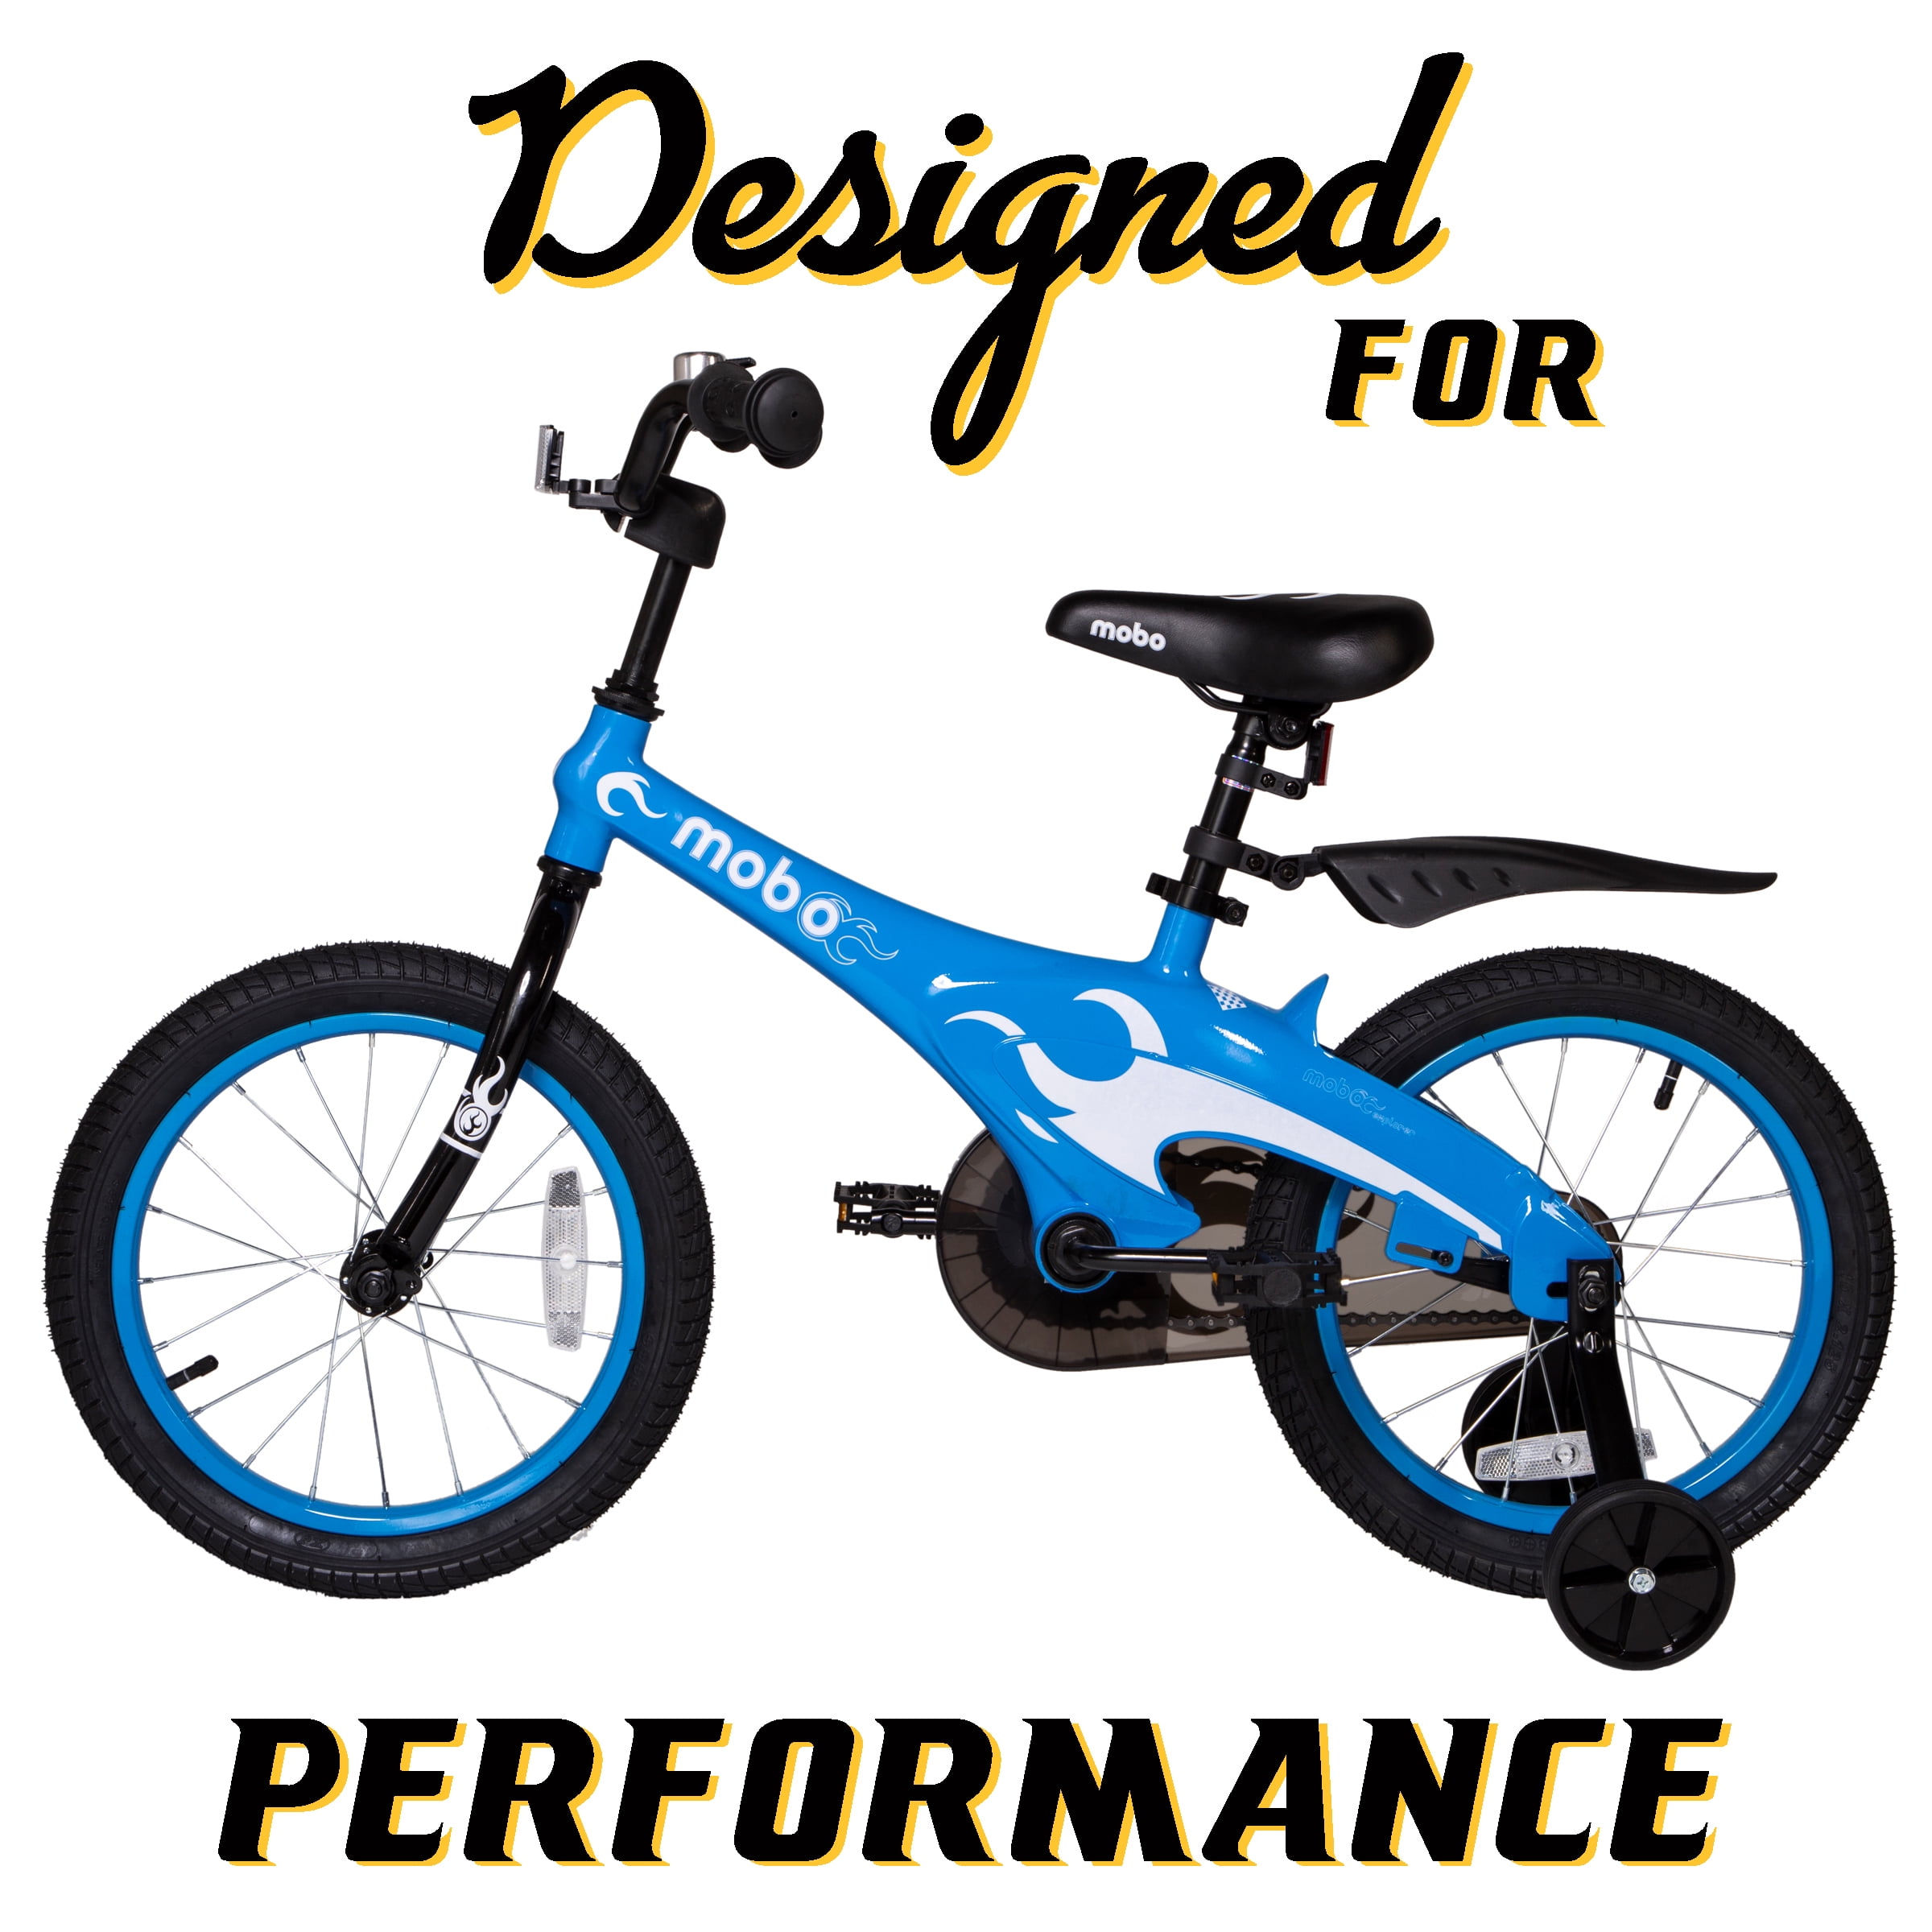 NEW 16"BICYCLE TRAINING WHEELS KIDS BIKES COMPLETE